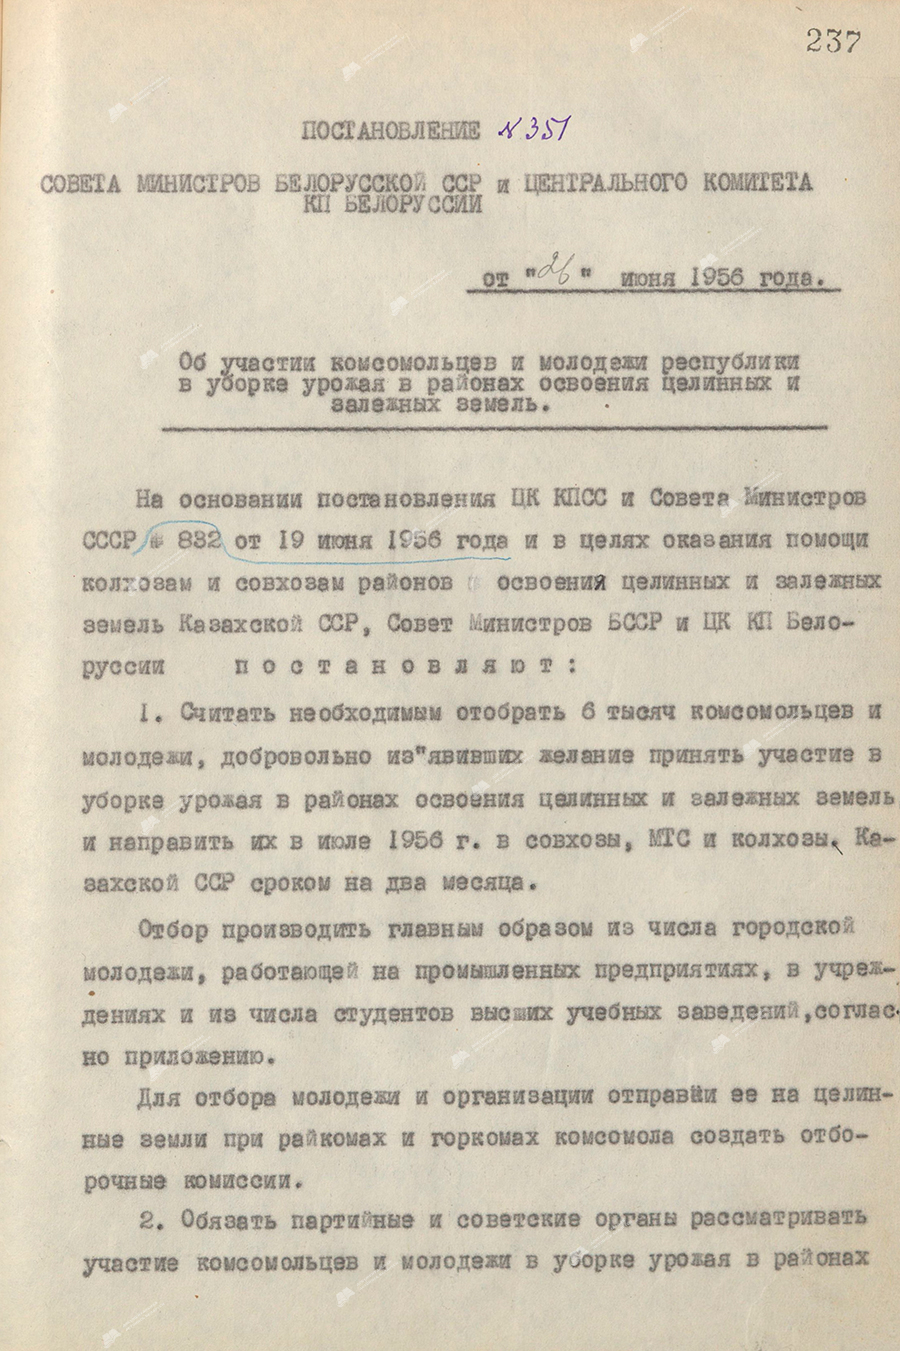 Resolution No. 351 of the Council of Ministers of the BSSR and the Central Committee of the Communist Party of Belarus «On the participation of Komsomol members and youth of the republic and harvesting in areas of development of virgin and fallow lands»-стр. 0